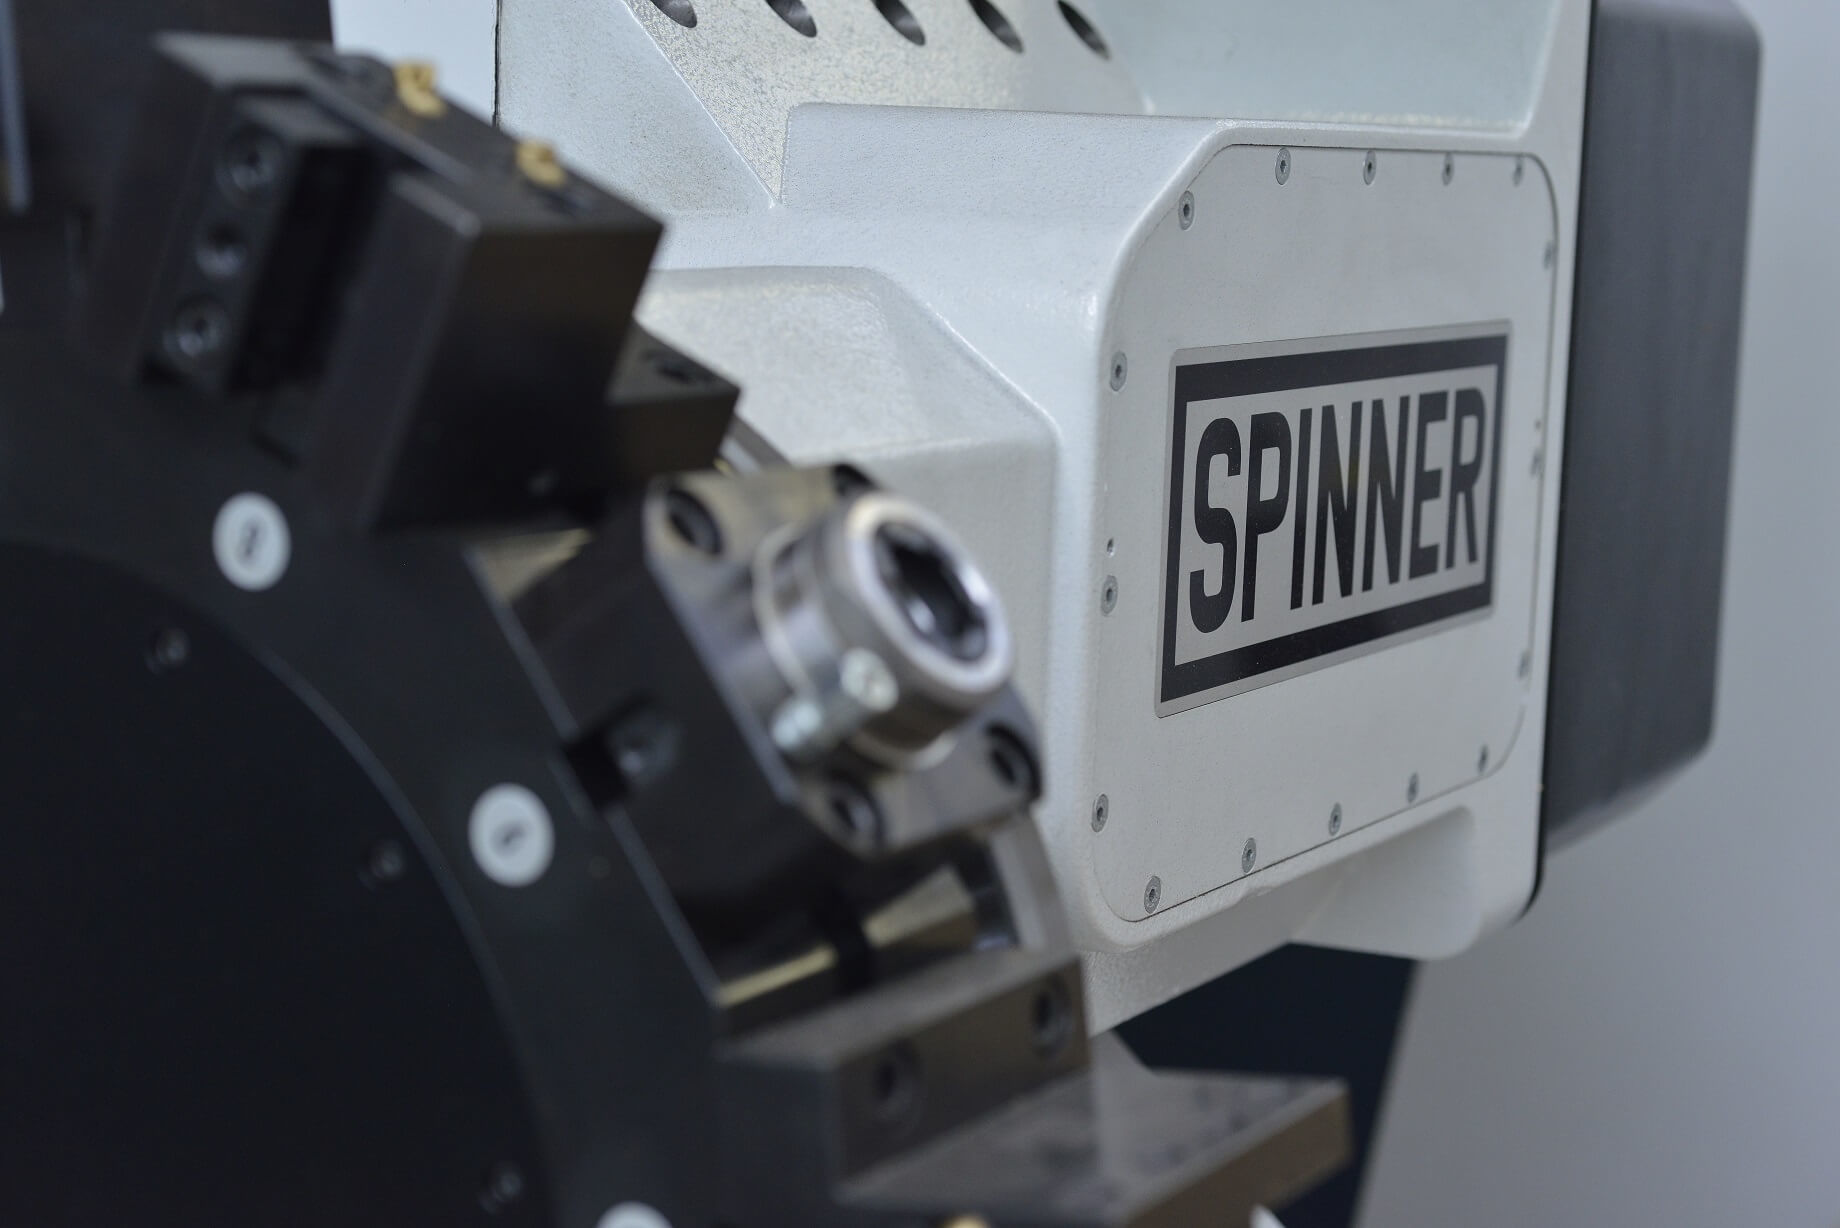 Spinner CNC Lathes